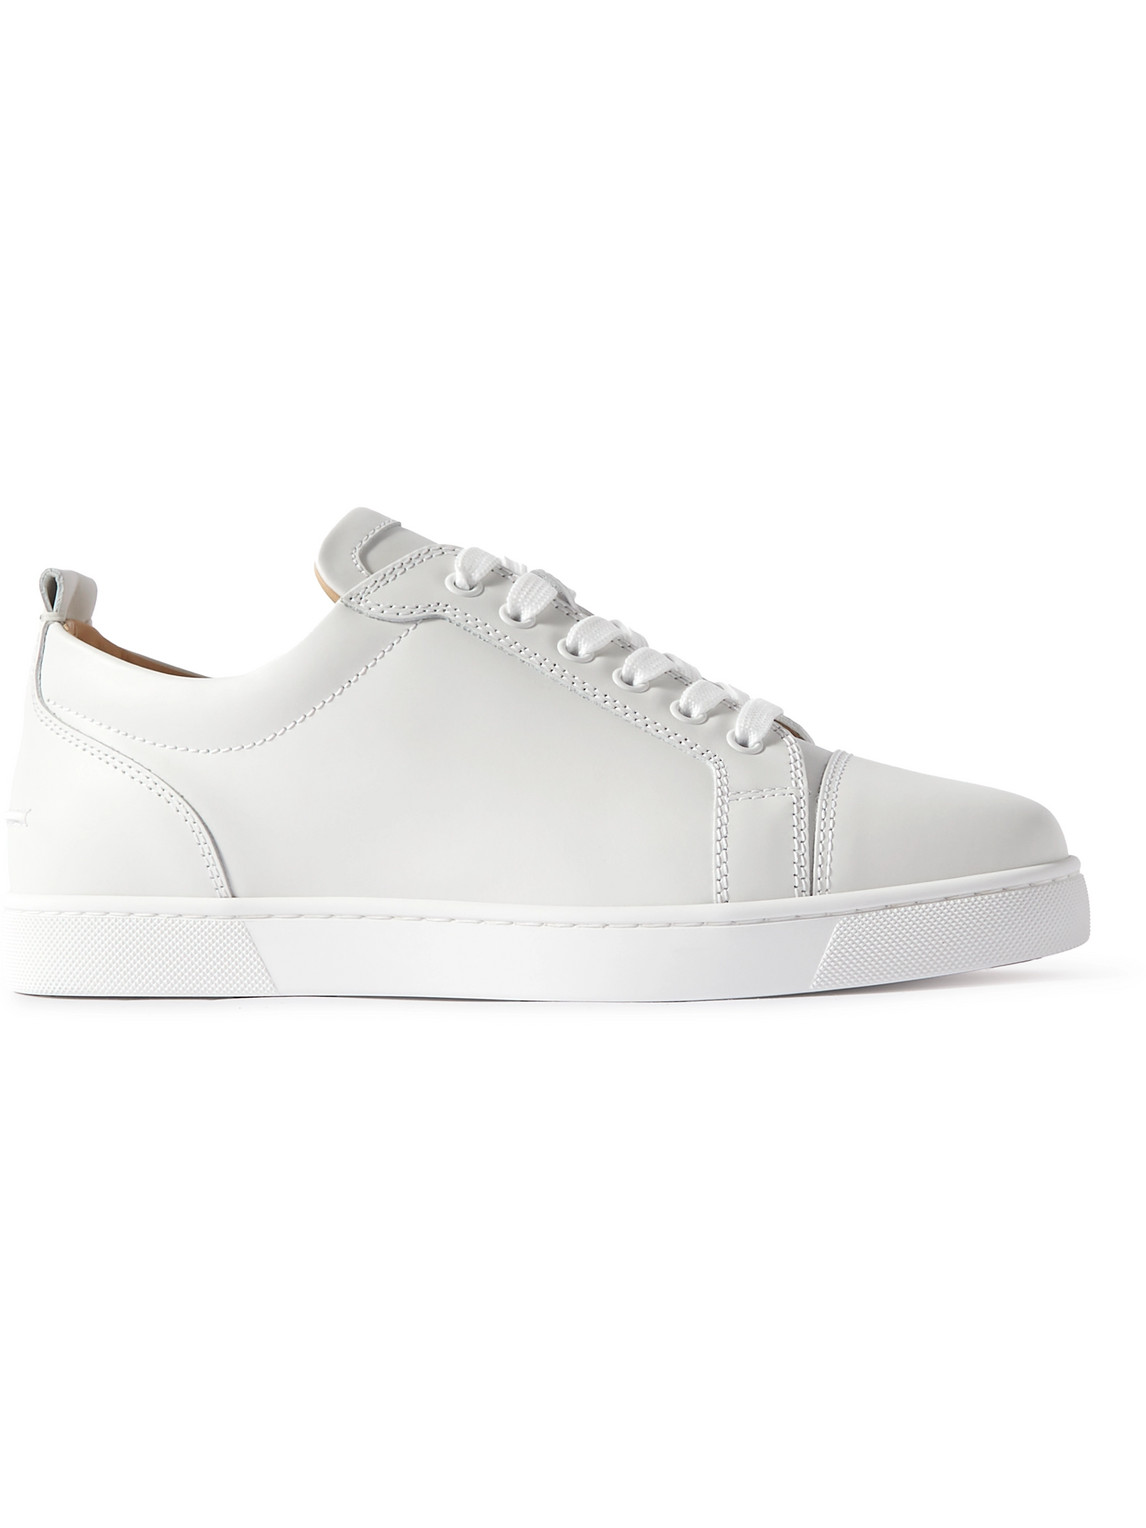 Christian Louboutin Louis Junior Leather Sneakers In White